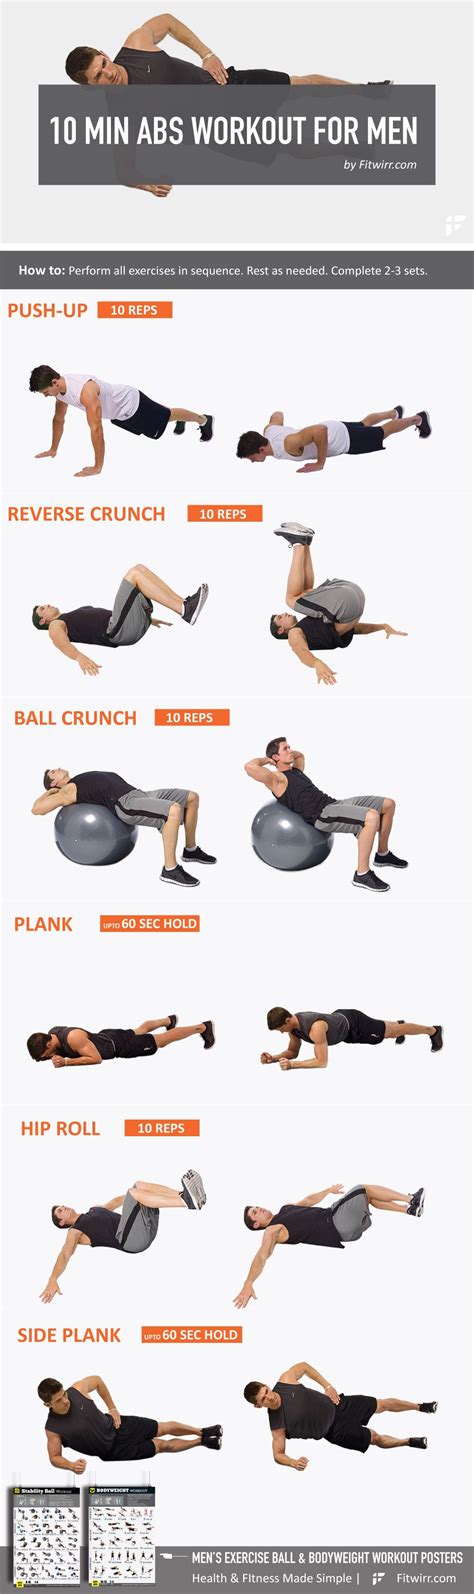 14 Best Ab Workouts For Men To Get Six Pack Abs Fitwirr Ab Workout